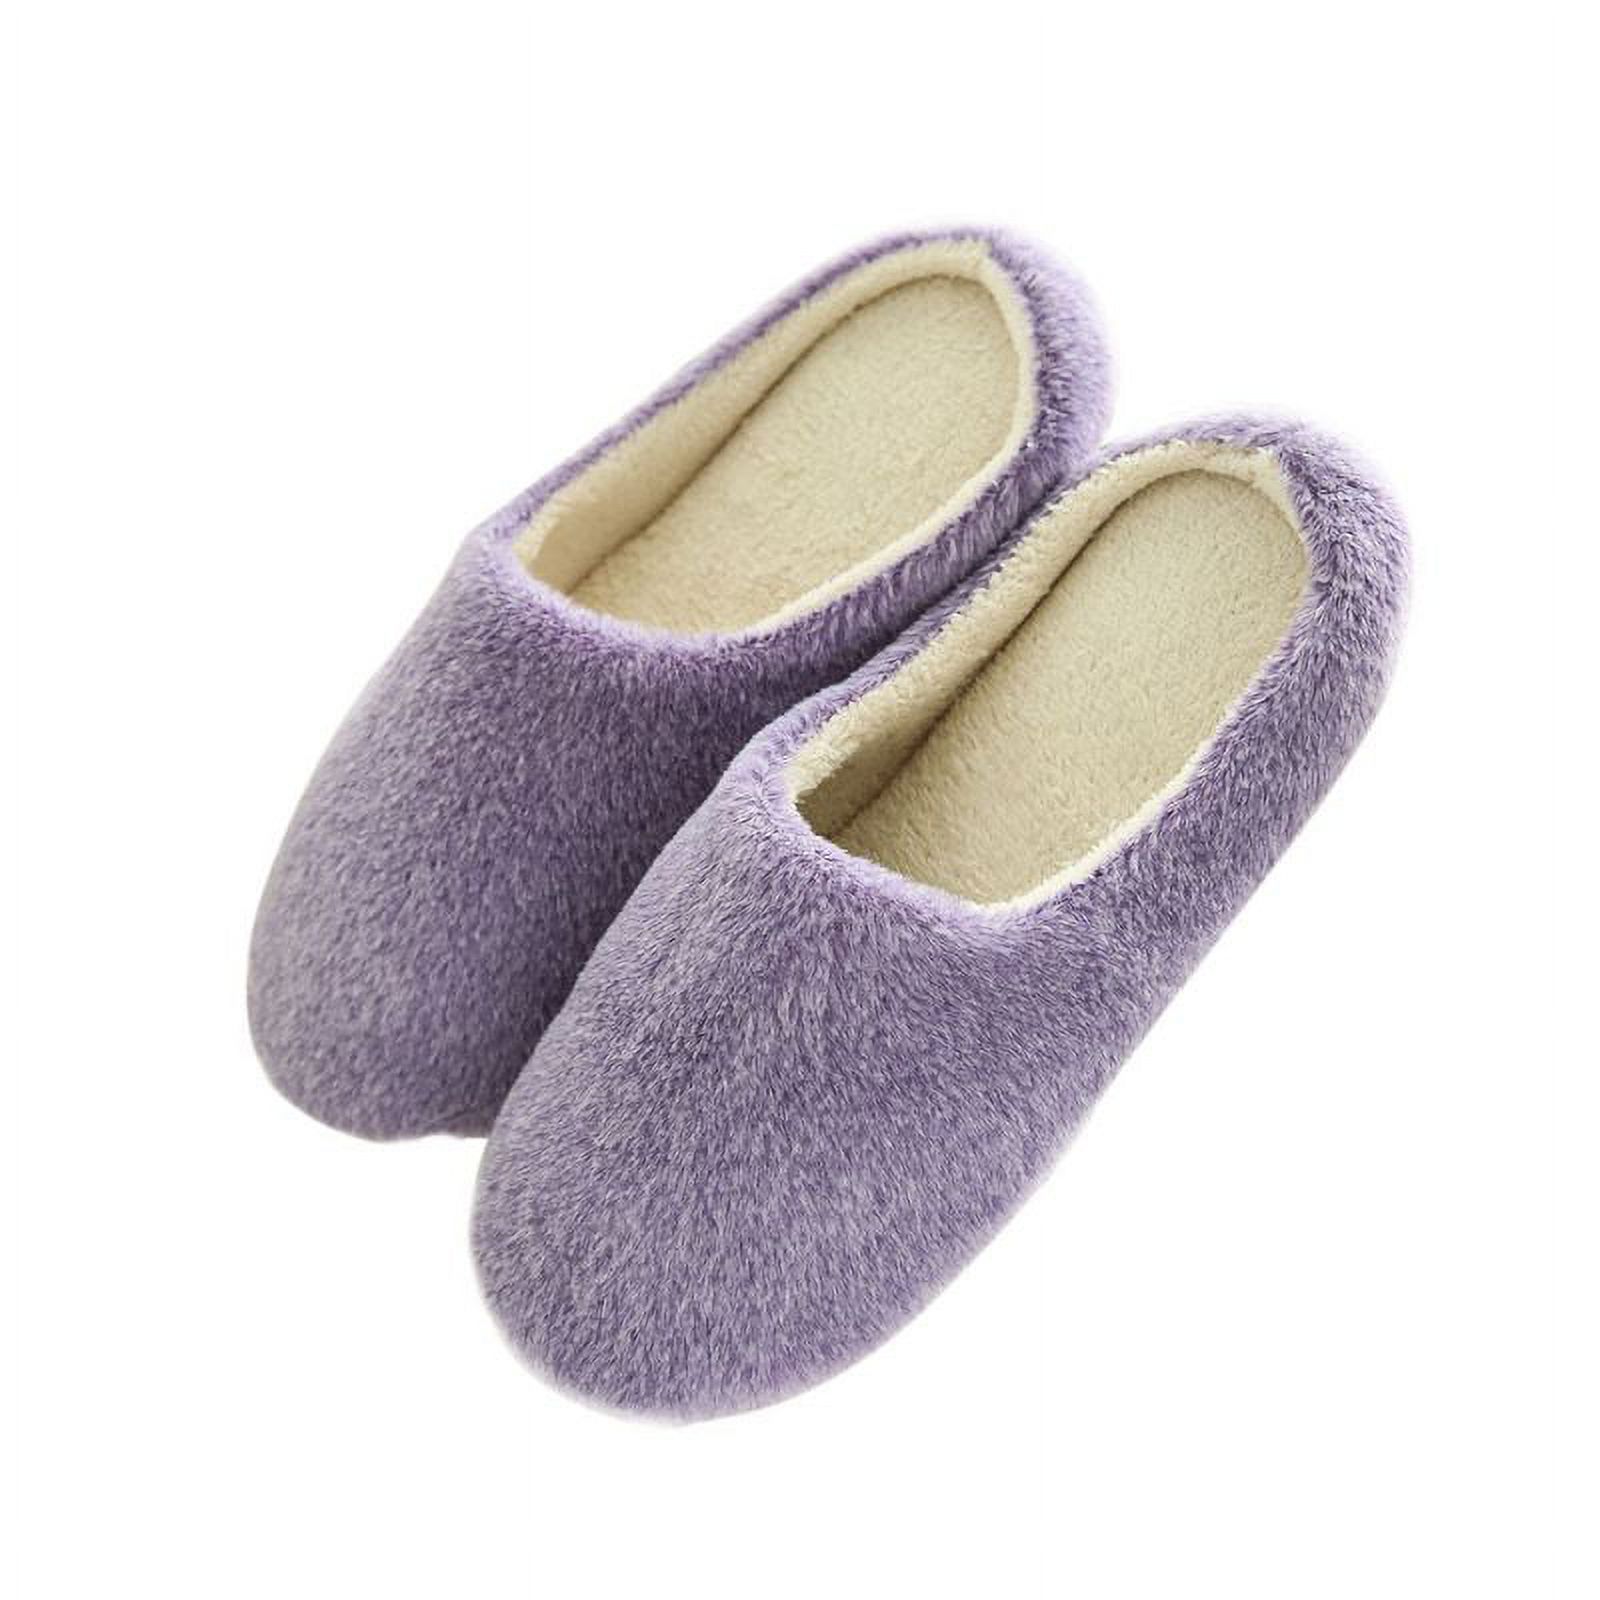 Clearance Women Men Winter Warm Fleece Anti-Slip Slippers Indoor House Shoes Lovers Home Floor Slippers Shoes - image 2 of 5